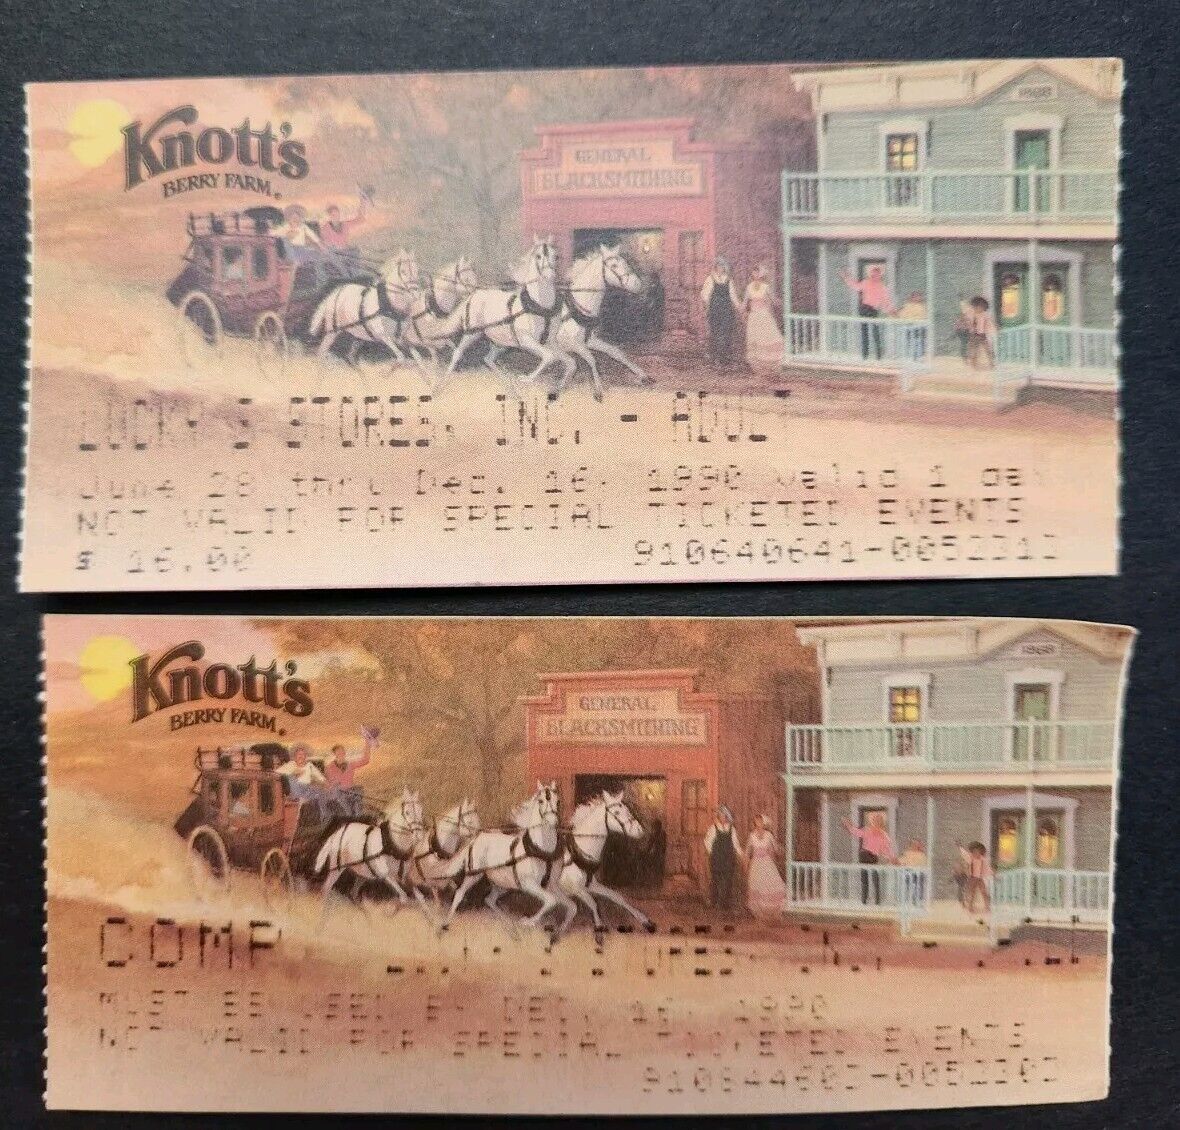 Lot of 2 Knotts Berry Farm Vintage Tickets - Buena Park, CA from Dec. 1990